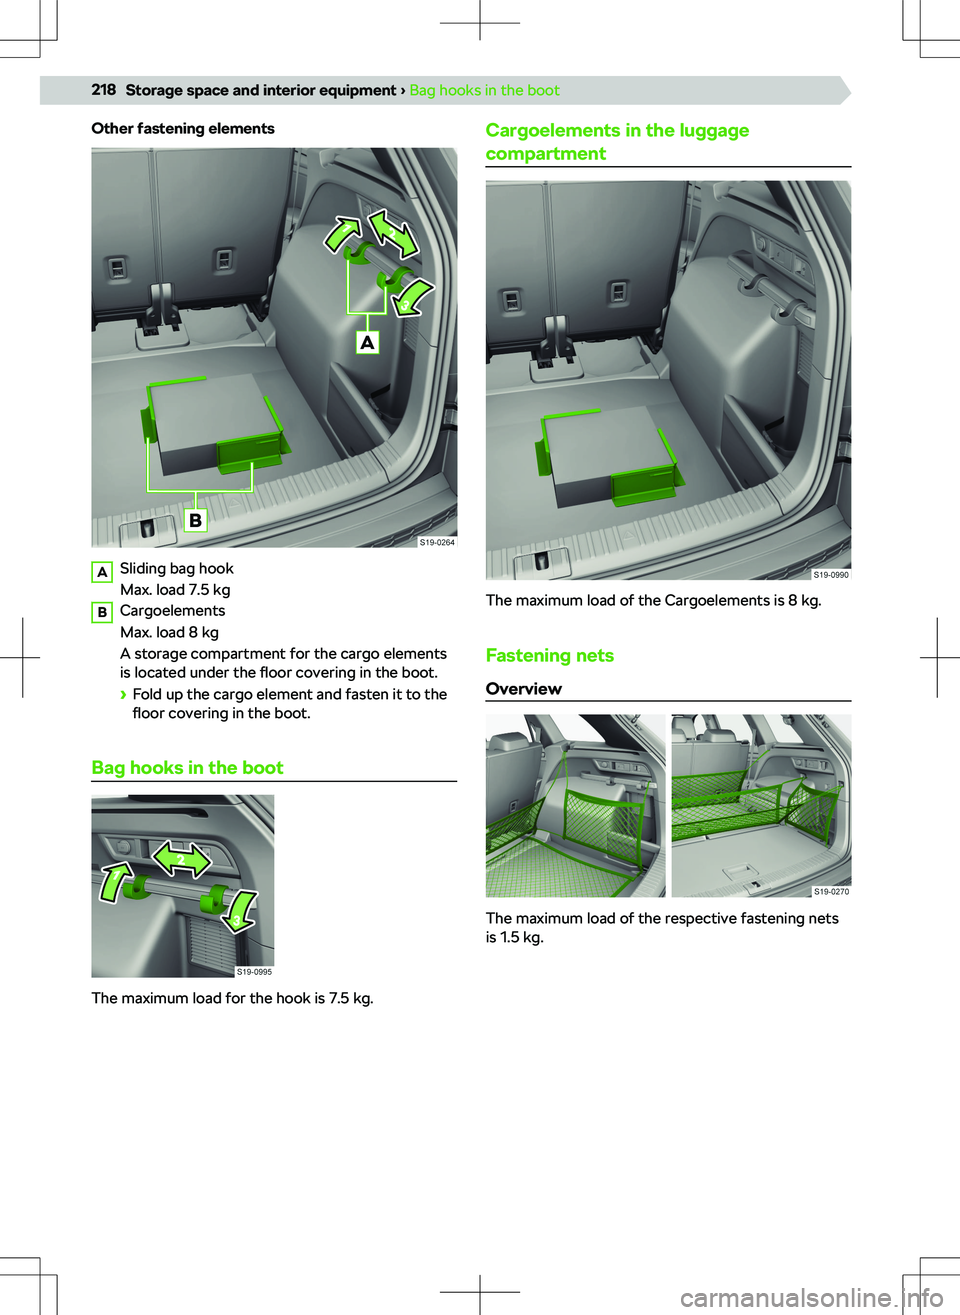 SKODA KODIAQ 2022  Owner´s Manual Other fastening elementsA
Sliding bag hook
Max. load 7.5 kg
B
Cargoelements
Max. load 8 kg
A storage compartment for the cargo elements
is located under the  floor covering in the boot.
